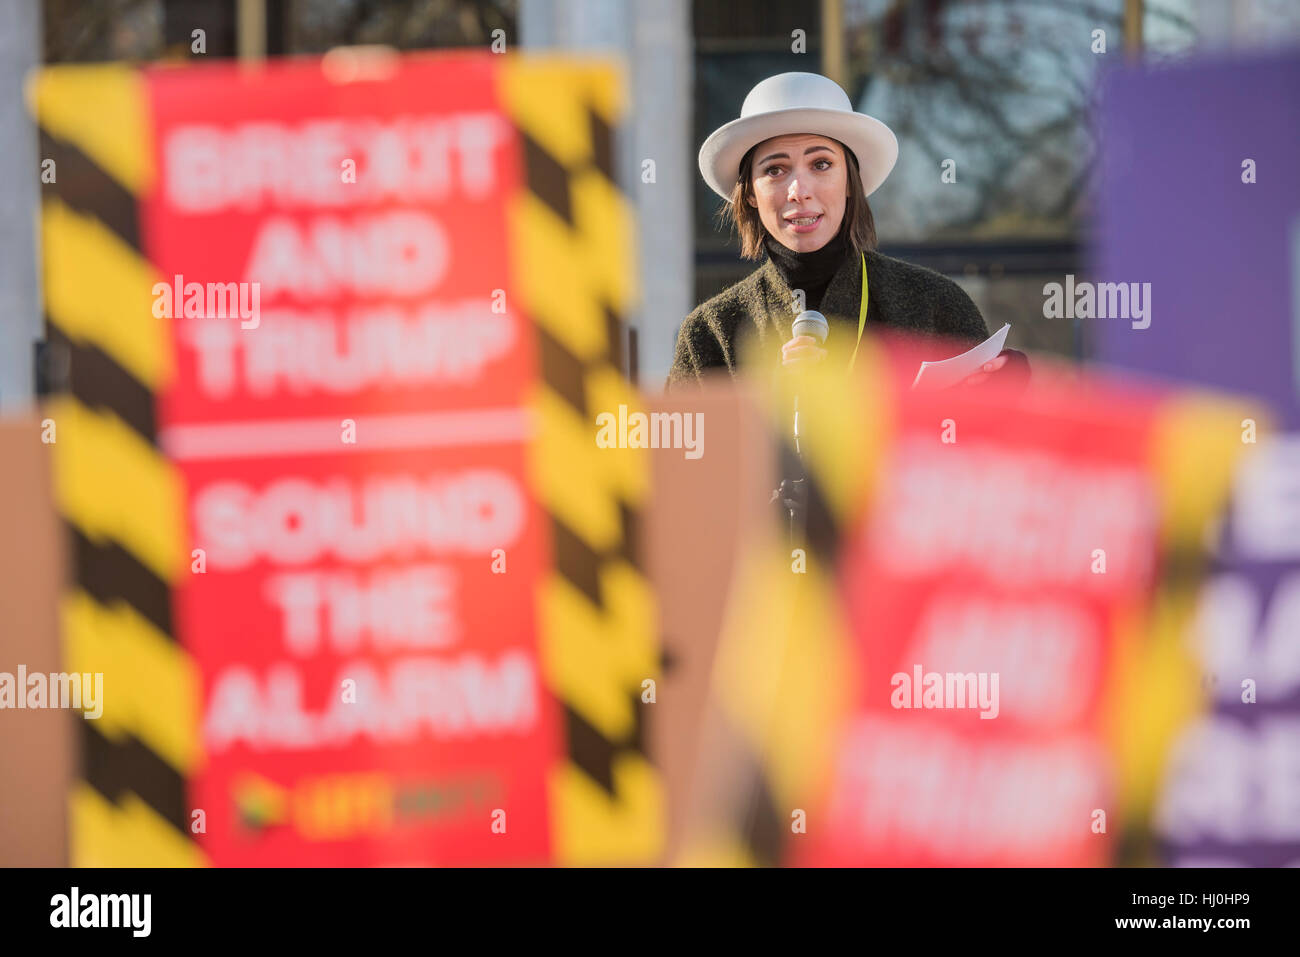 London, UK. 21st January, 2017. Rebecca Hall, actress, introduces speakers outside the US Embassy - Women's March on London - a grassroots movement of women has organised marches around the world to assert the 'positive values that the politics of fear denies' on the first day of Donald Trump’s Presidency. Their supporters include: Amnesty International, Greenpeace, ActionAid UK, Oxfam GB, The Green Party, Pride London, Unite the Union, NUS, 50:50 Parliament, Stop The War Coalition, CND. Credit: Guy Bell/Alamy Live News Stock Photo